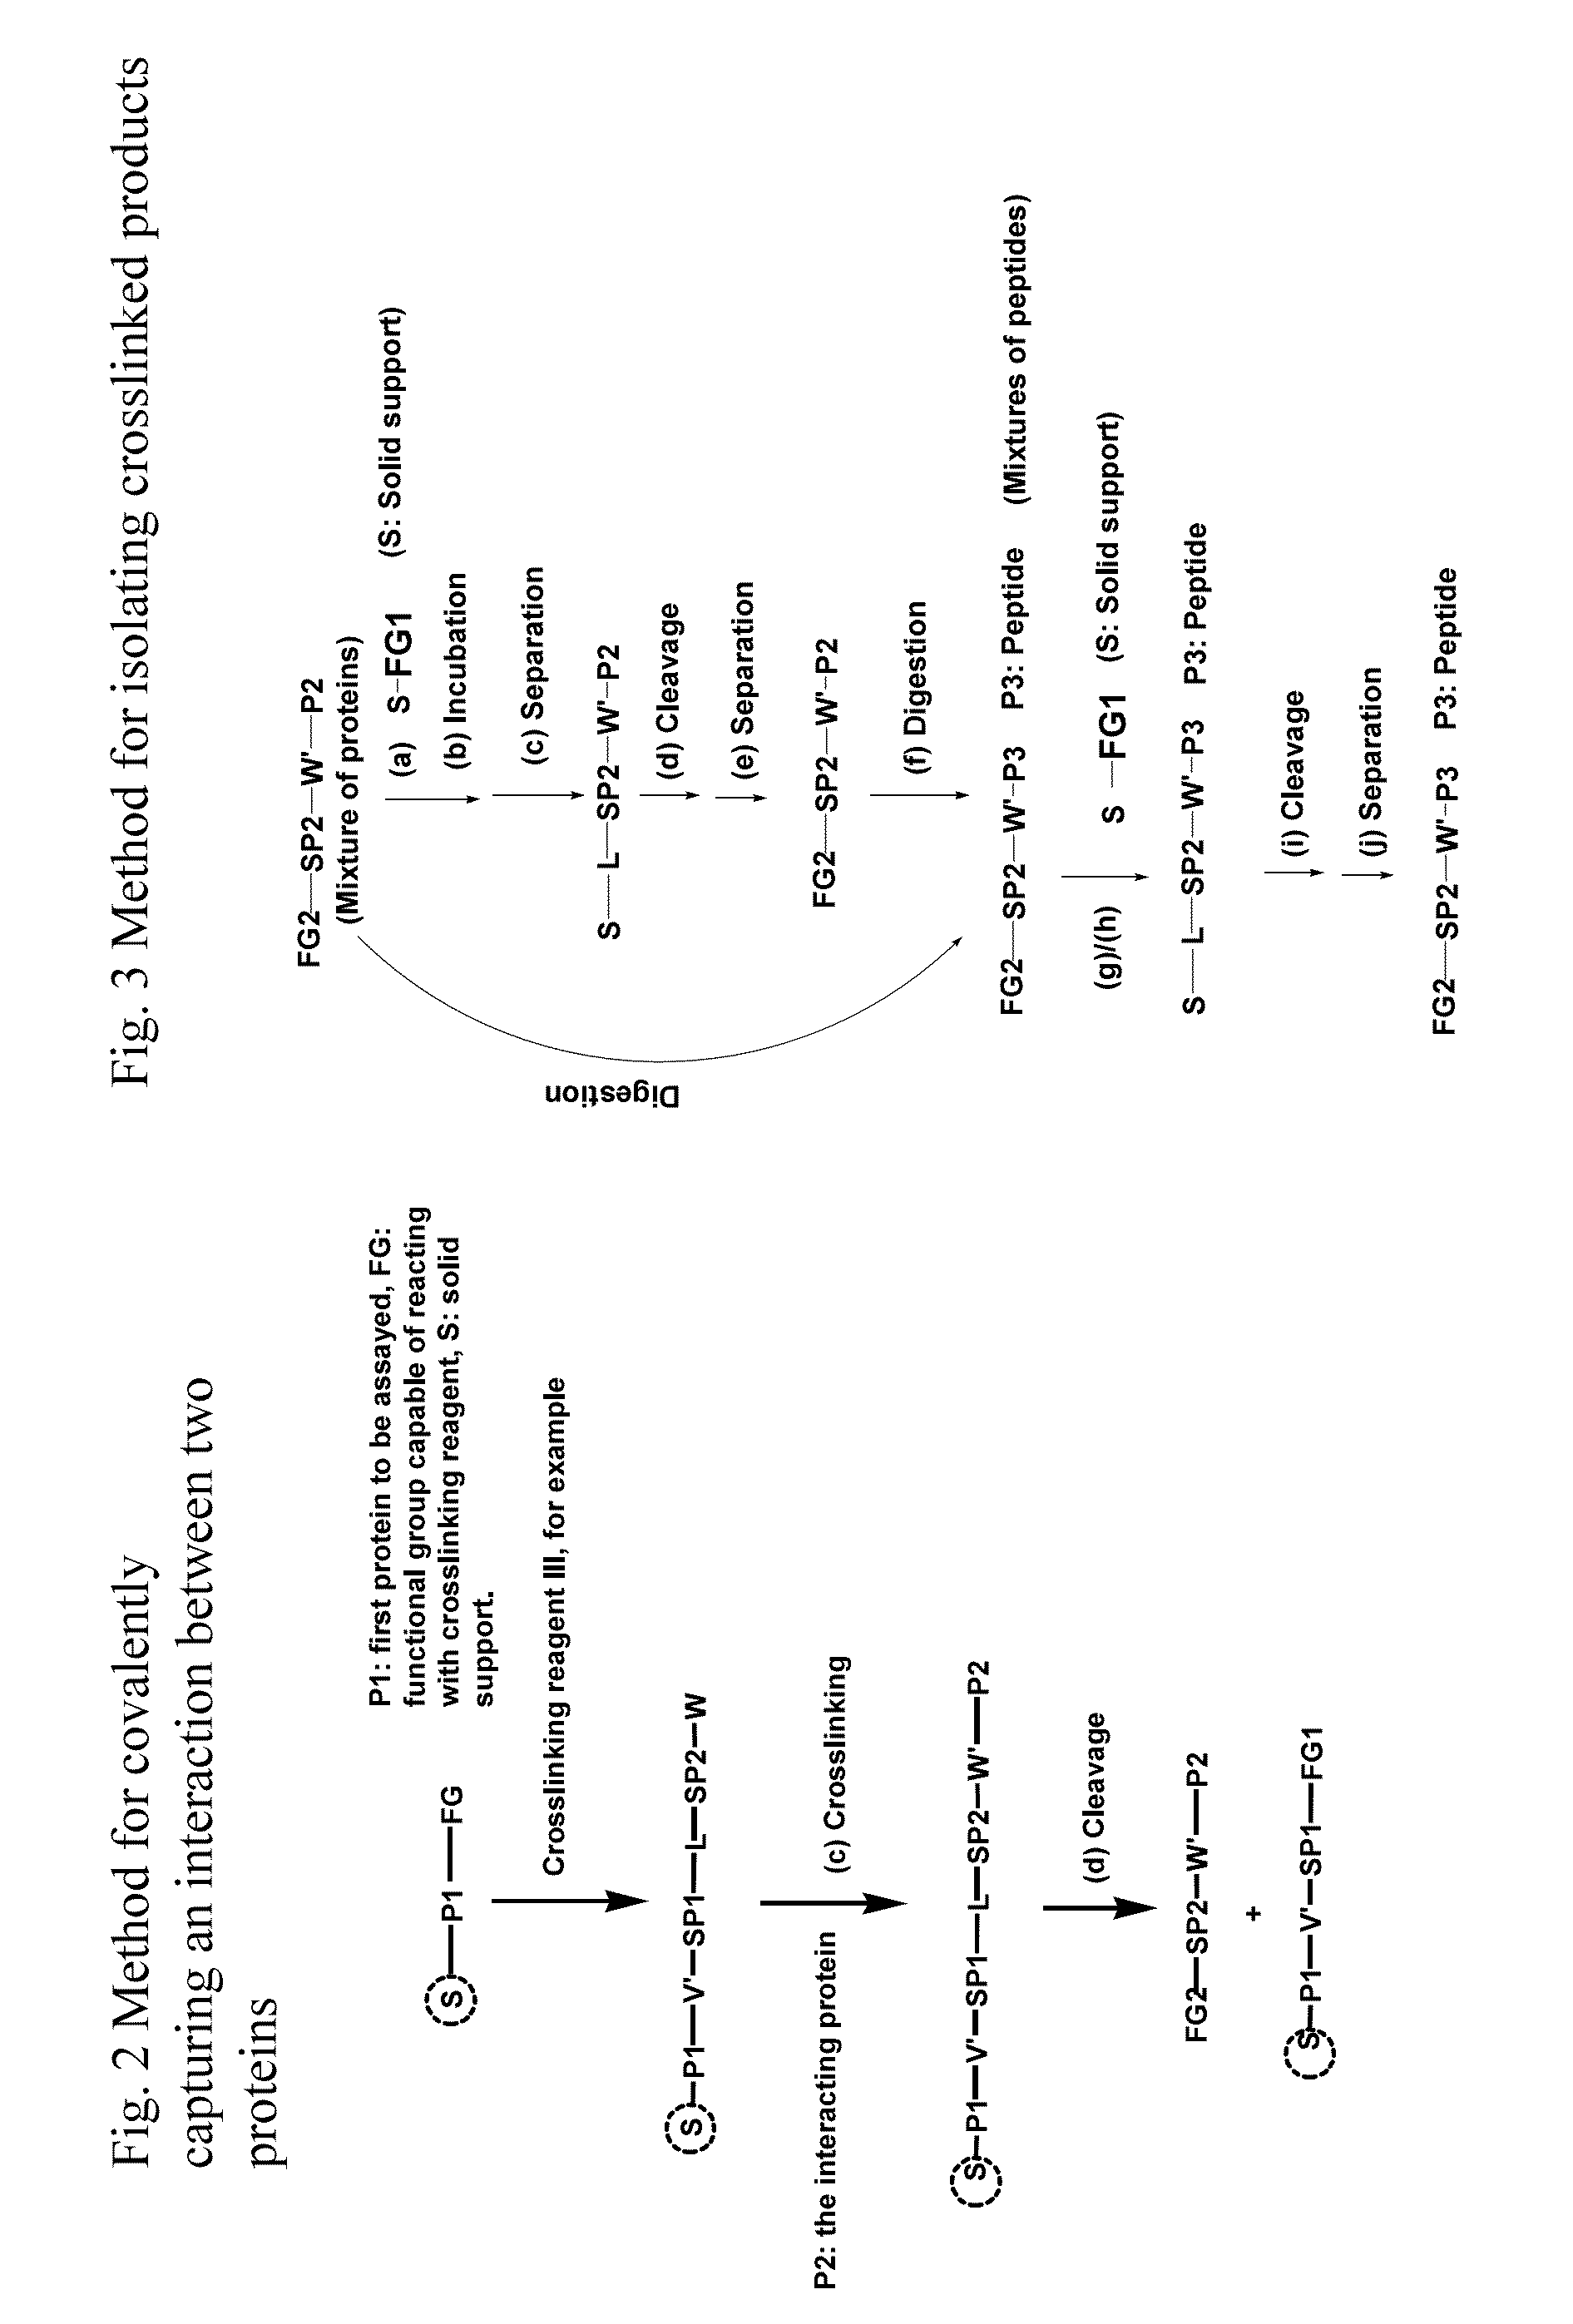 Crosslinking reagents, methods, and compositions for studying protein-protein interactions